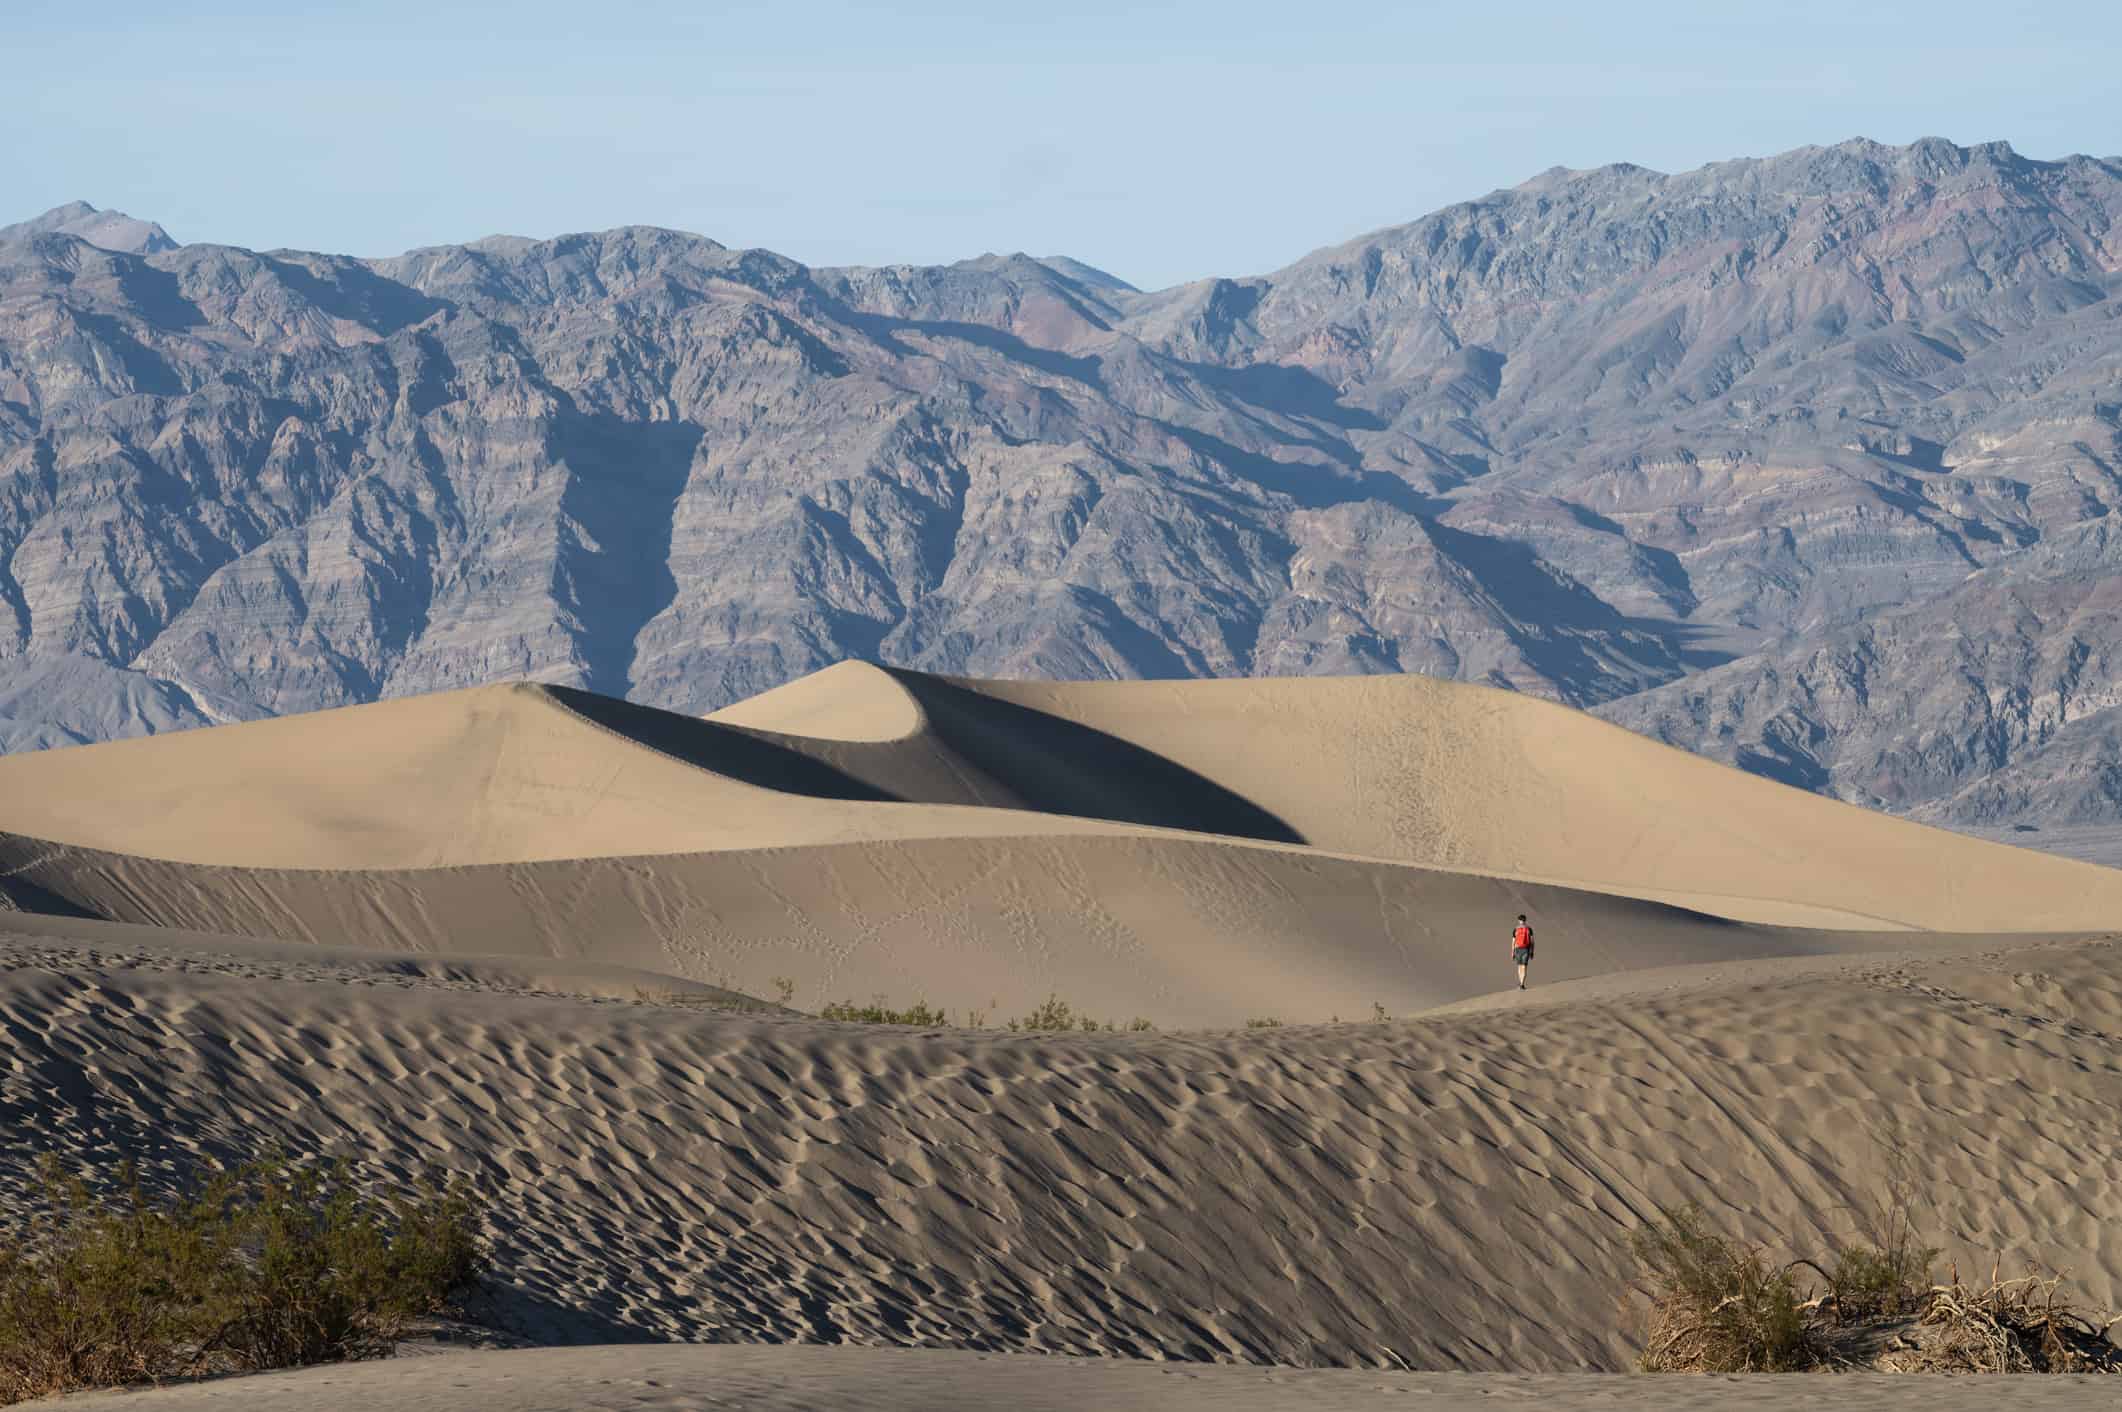 Mesquite Flat Sand Dunes at Sunset in Death Valley, California